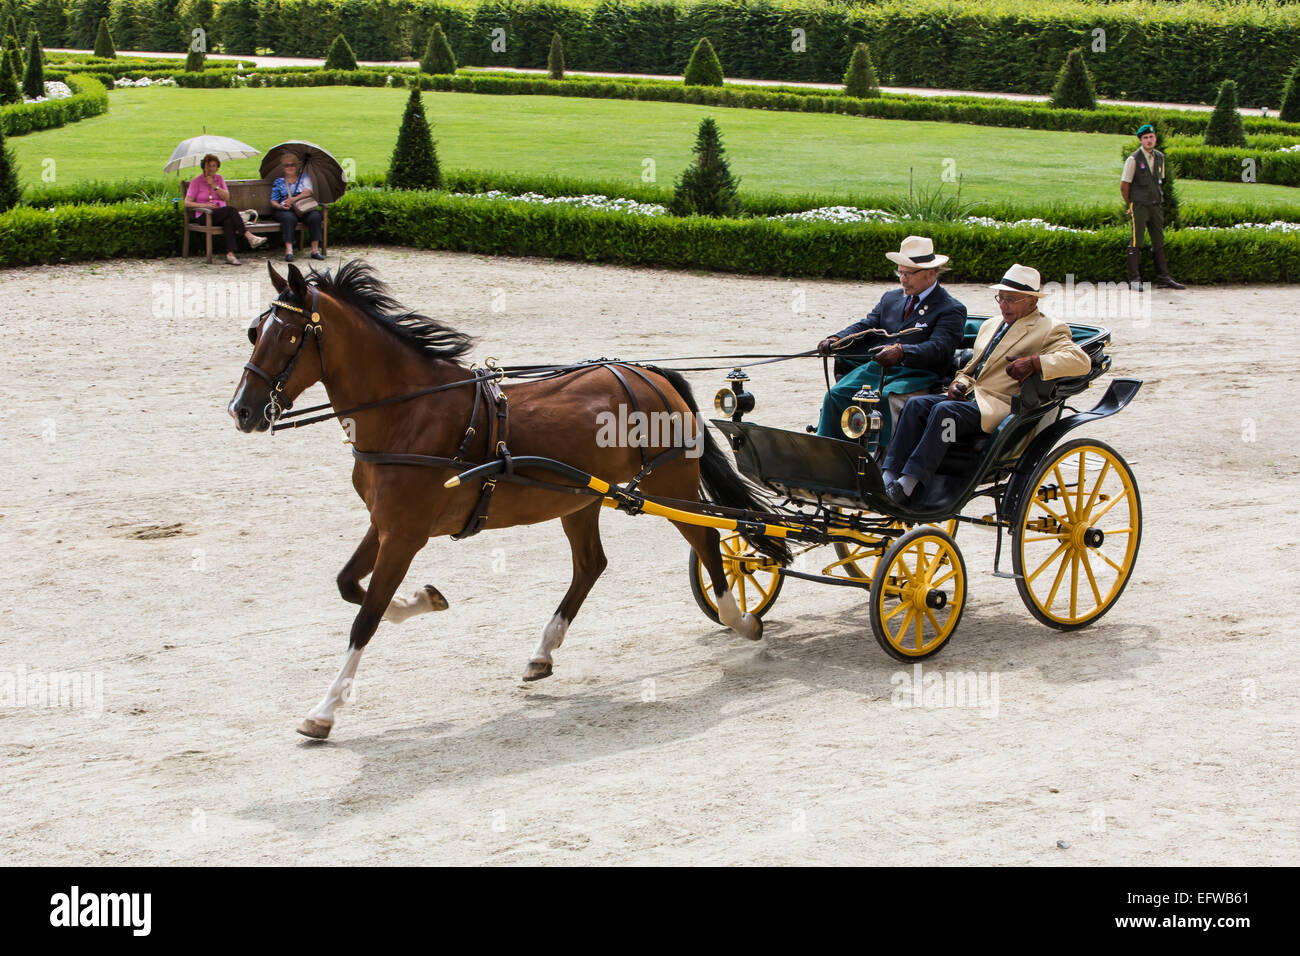 International competition for traditional carriages 'La Venaria Reale', carriage: Pistoiese , Horse: single Hackney,Italy Stock Photo